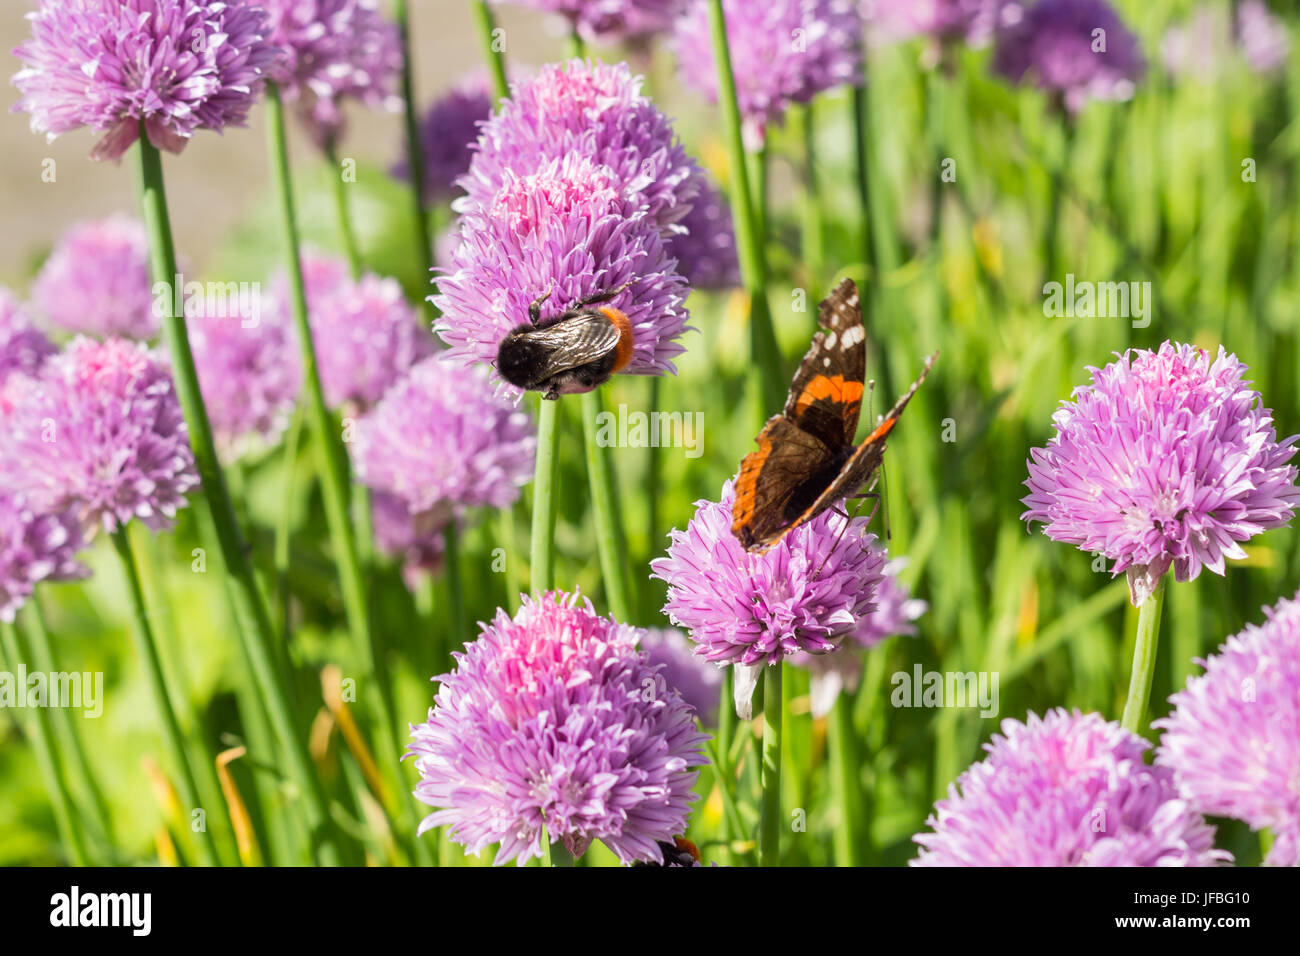 Bumble bee and red admiral drinking nectar from chive blossoms, shallow depth of field, macro Stock Photo